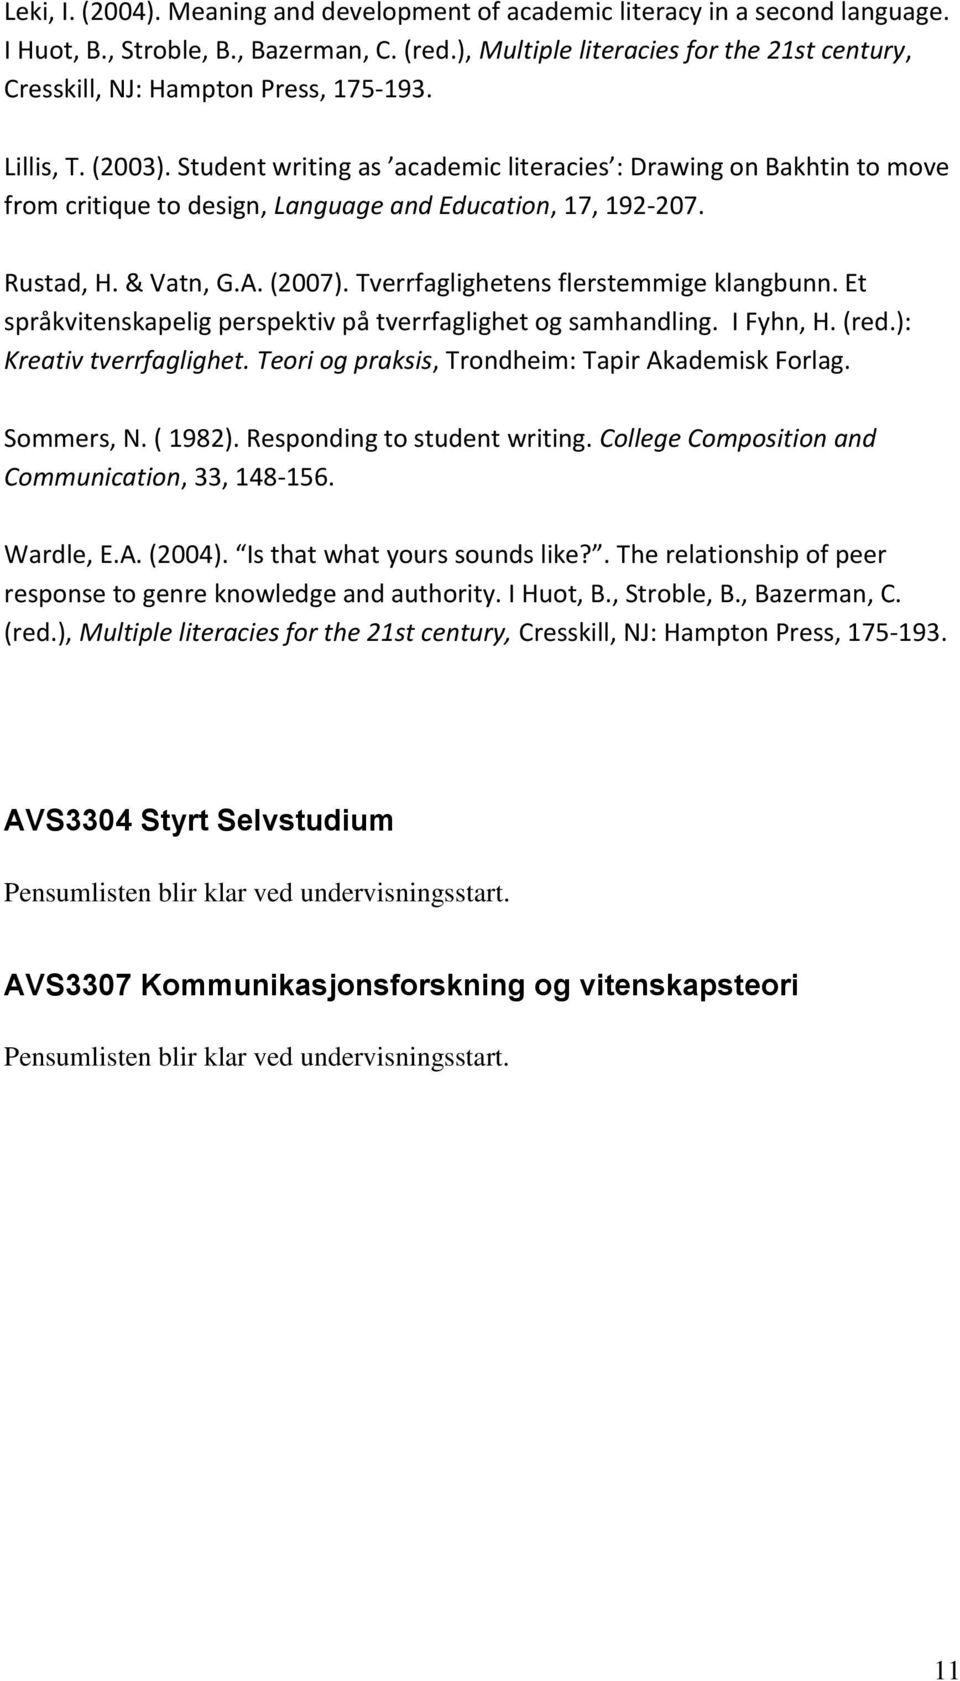 Student writing as academic literacies : Drawing on Bakhtin to move from critique to design, Language and Education, 17, 192-207. Rustad, H. & Vatn, G.A. (2007).